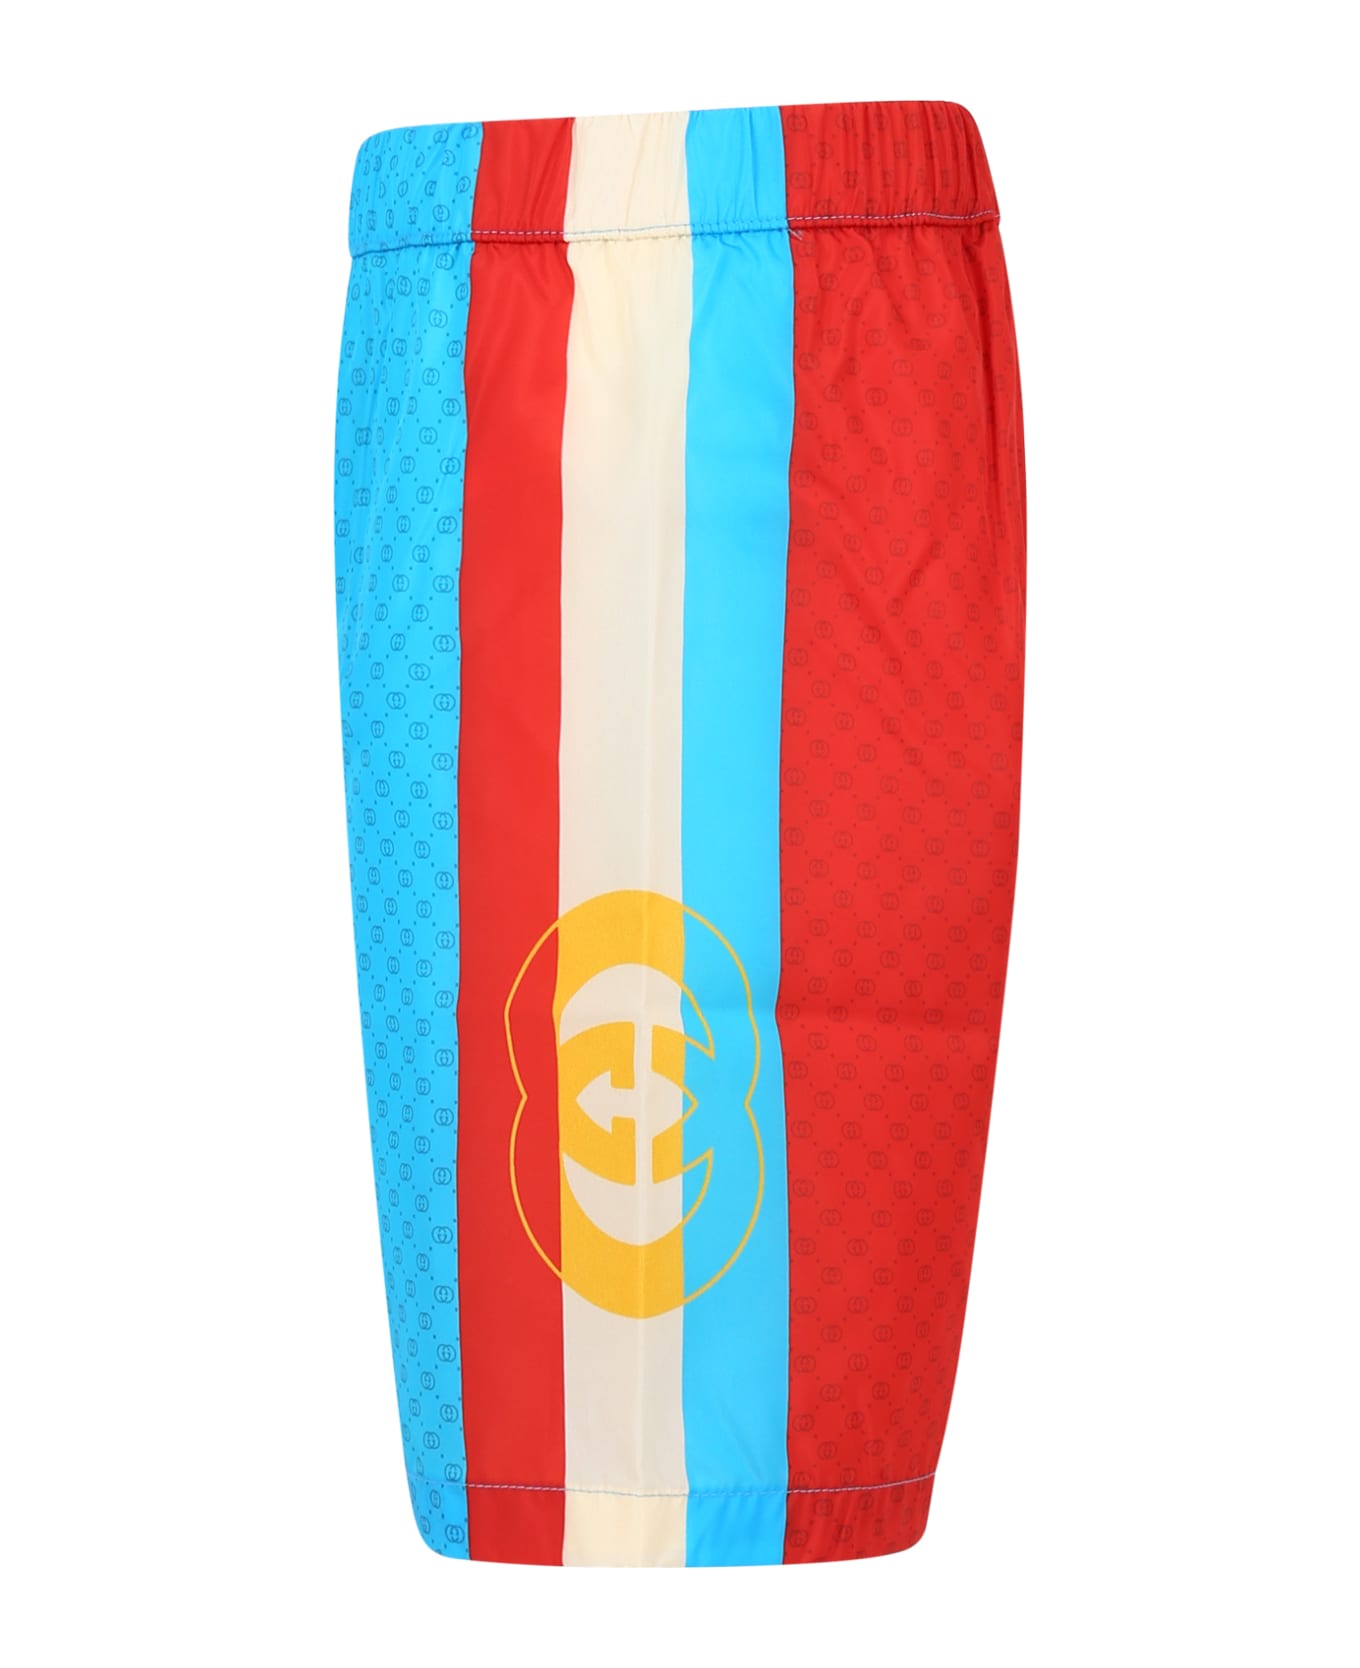 Gucci Multicolor Beach Shorts For Boy With All-over Logo Gg - Light Blue